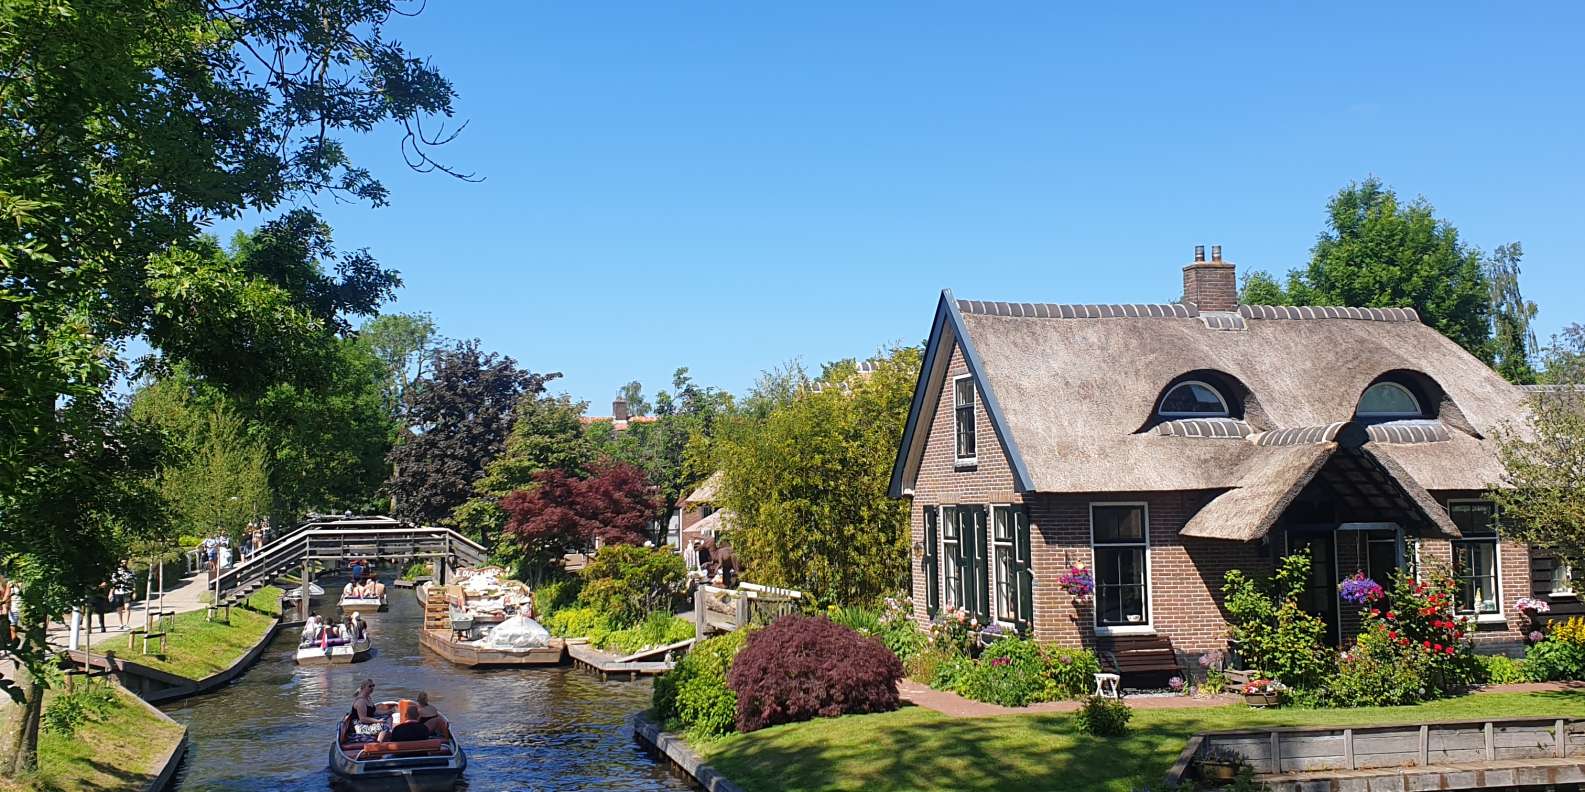 What to do in Giethoorn